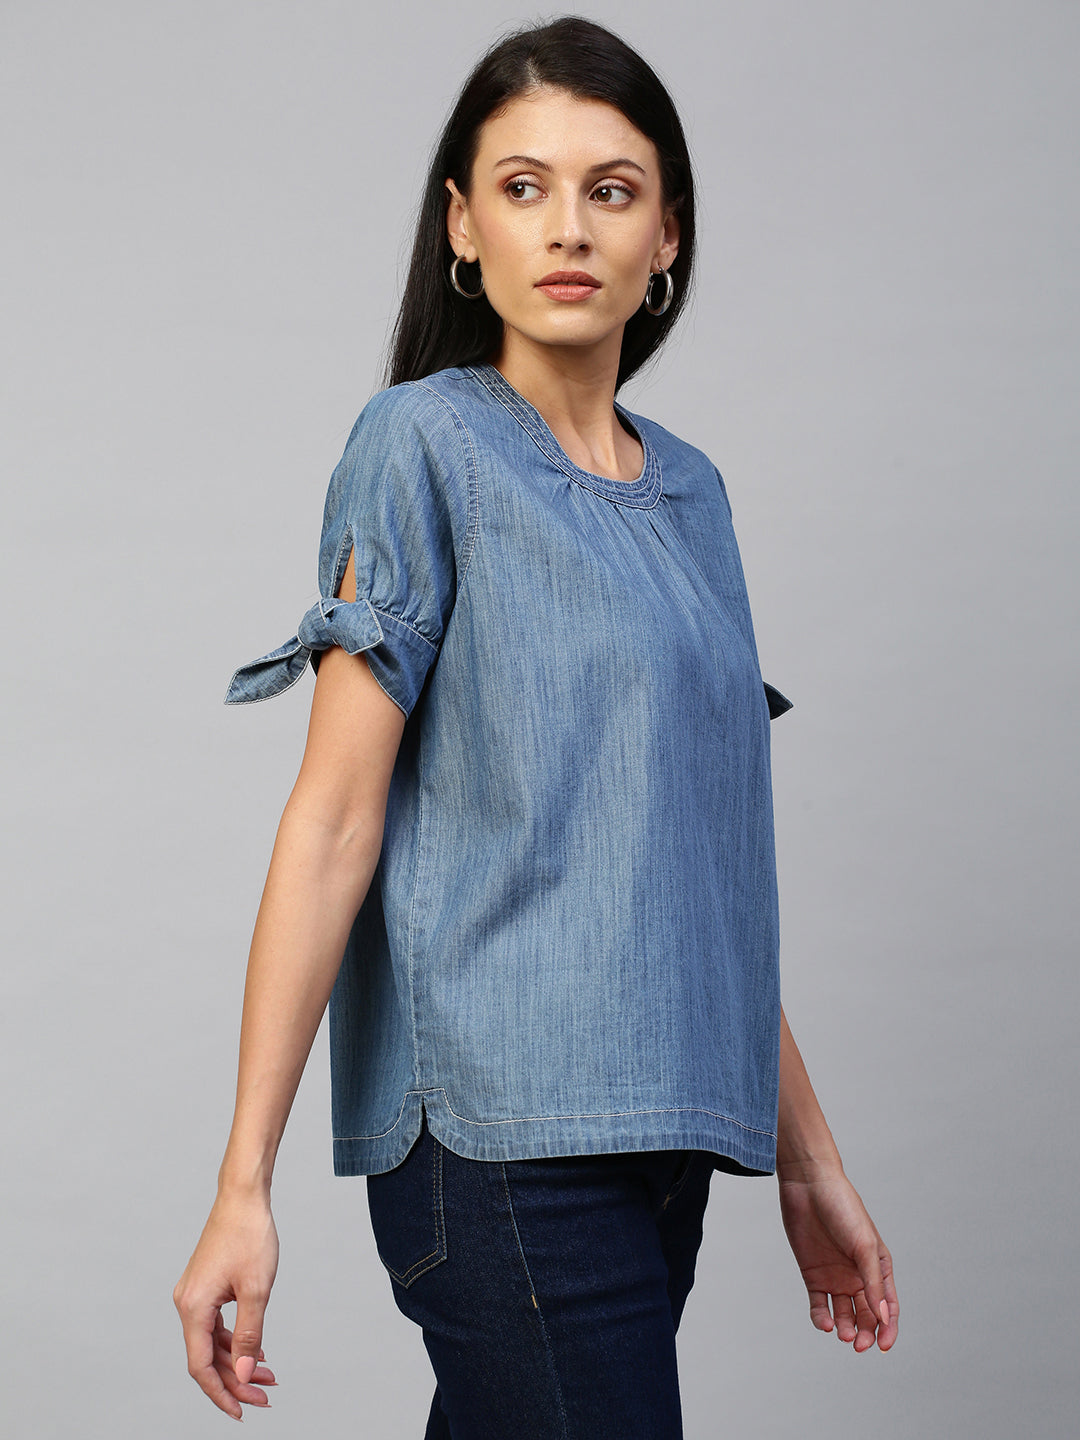 Mid Wash Blue, Light Weight Denim Box Top With Tie Up Sleeve Detailing